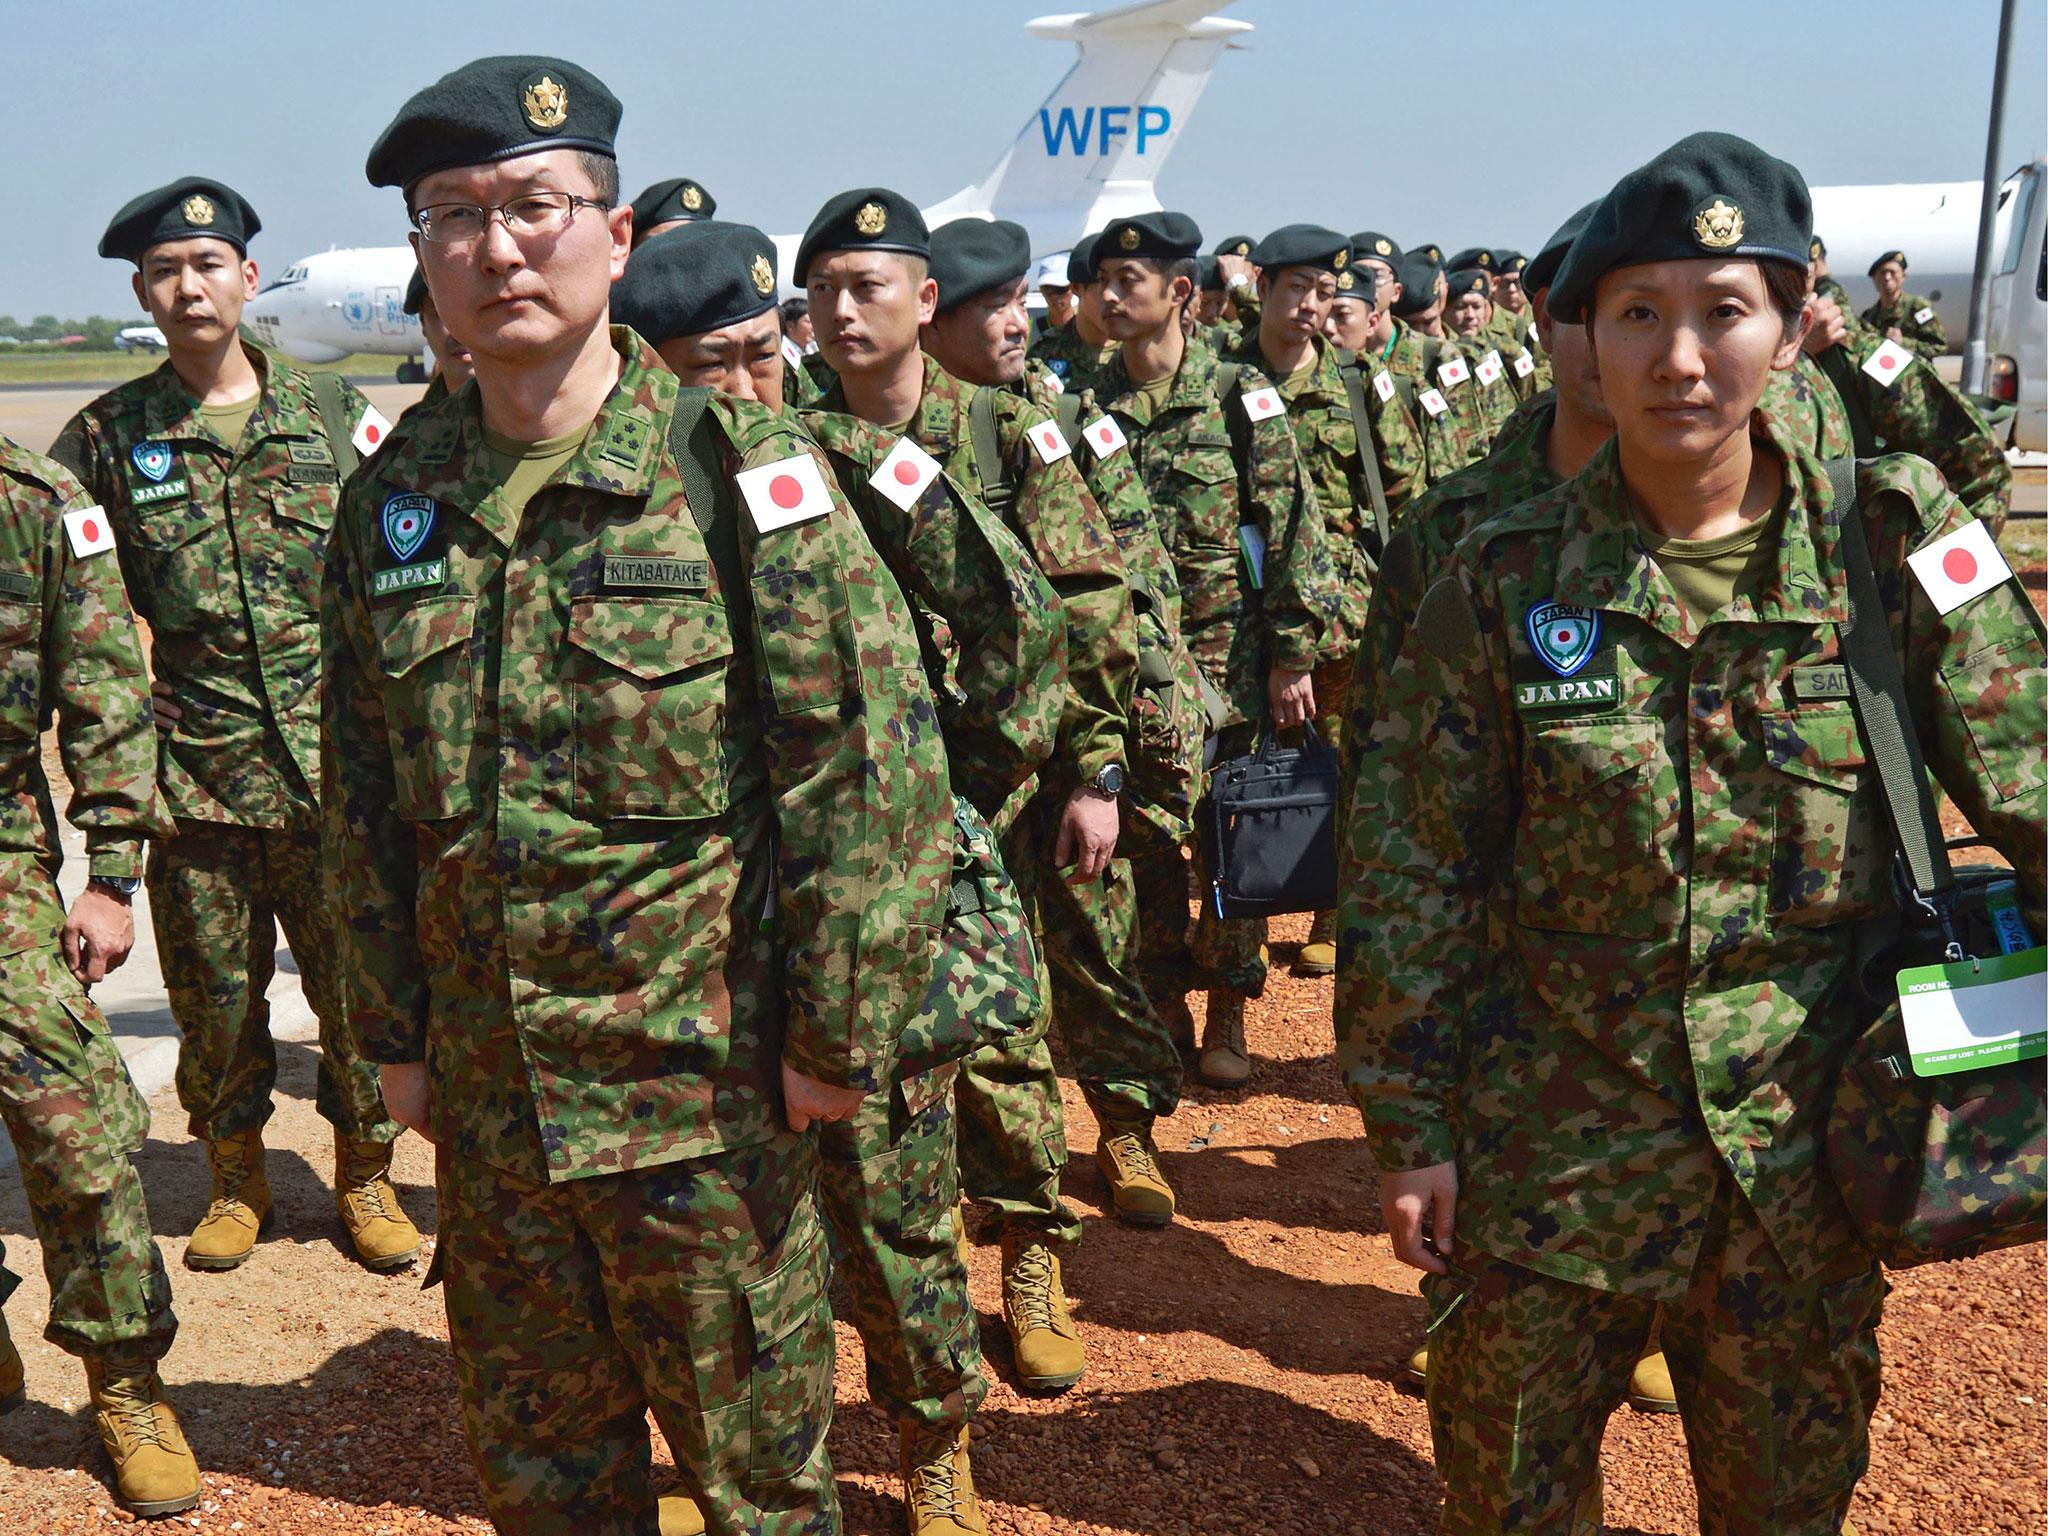 Members of the Japanese Ground Self-Defence Force (GSDF) arrive at the airport in Juba, South Sudan, on 21 November, 2016